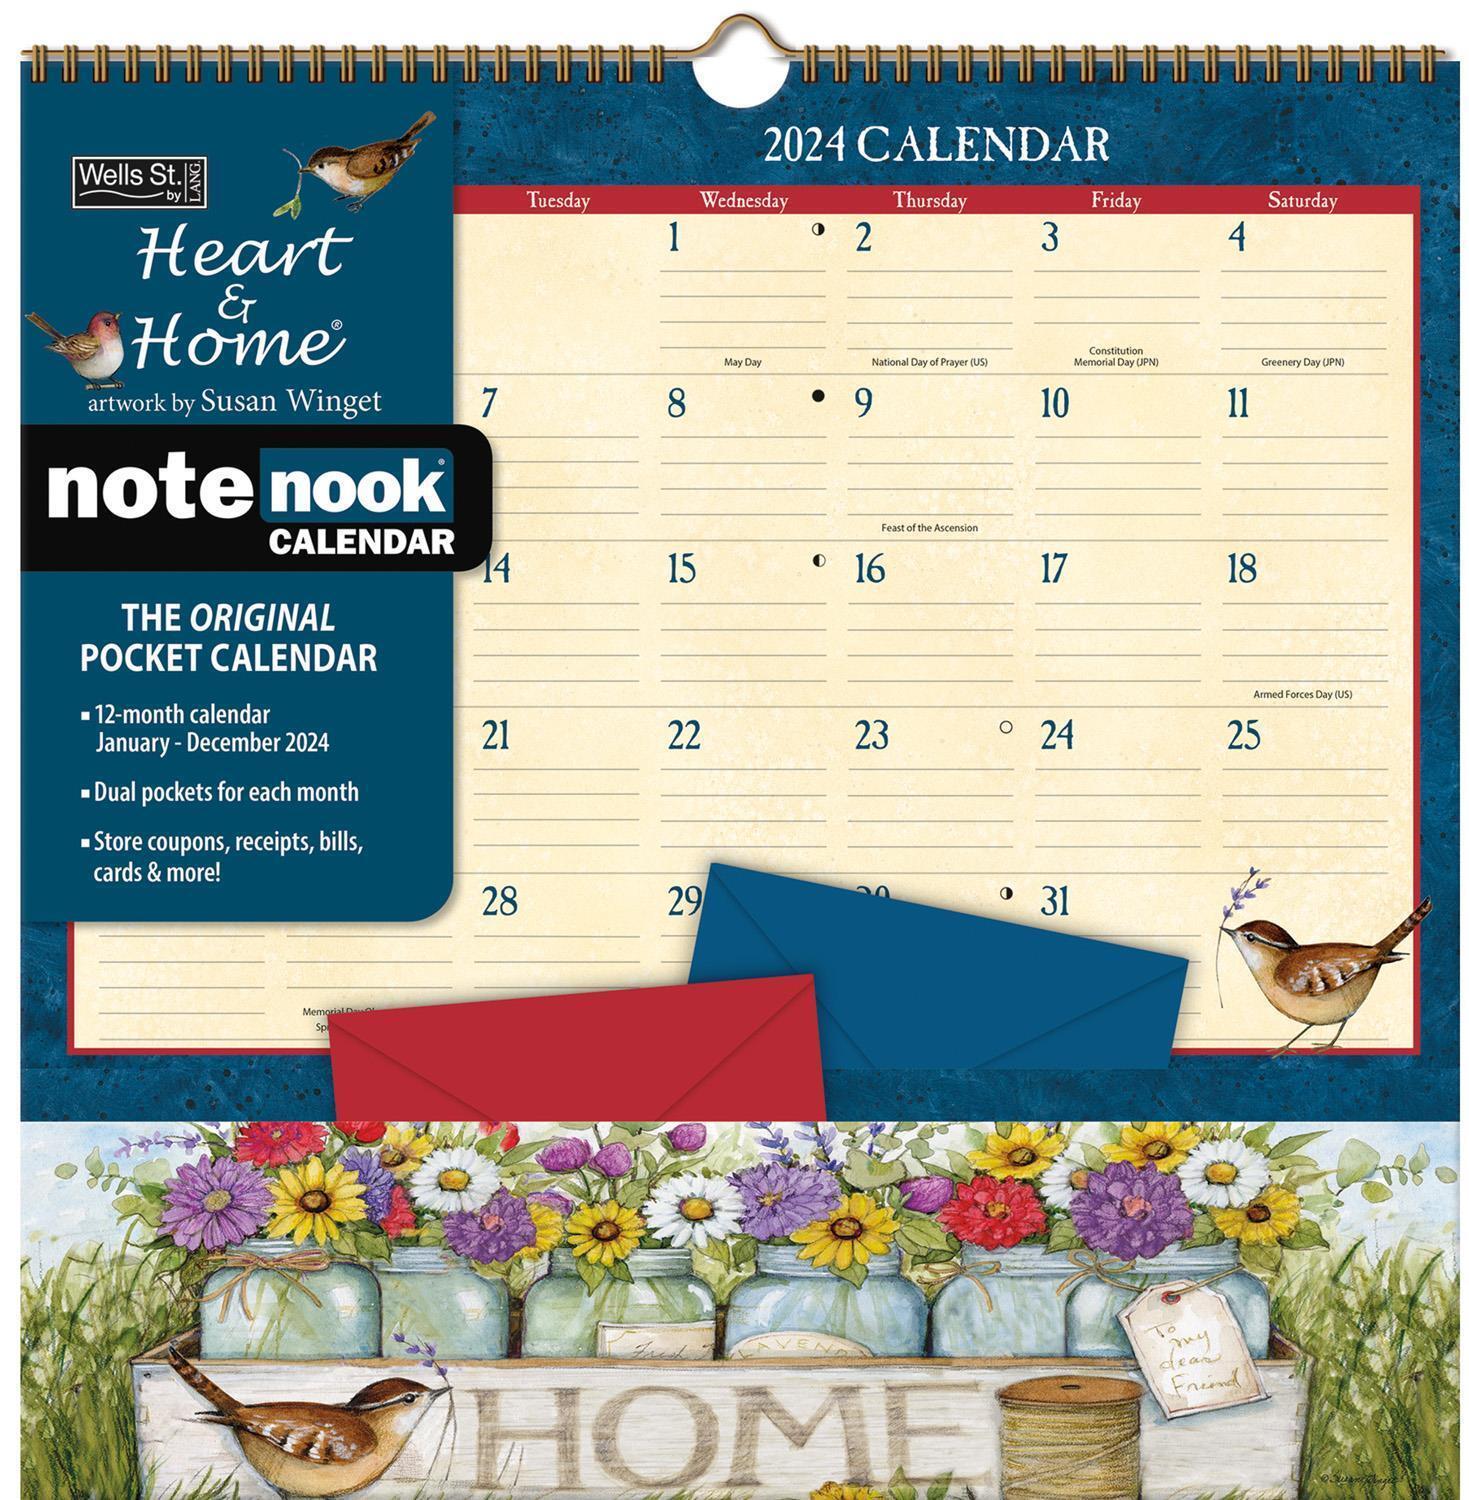 2024 Calendar Heart & Home by Susan Winget Note Nook Square Wall WSBL L30287